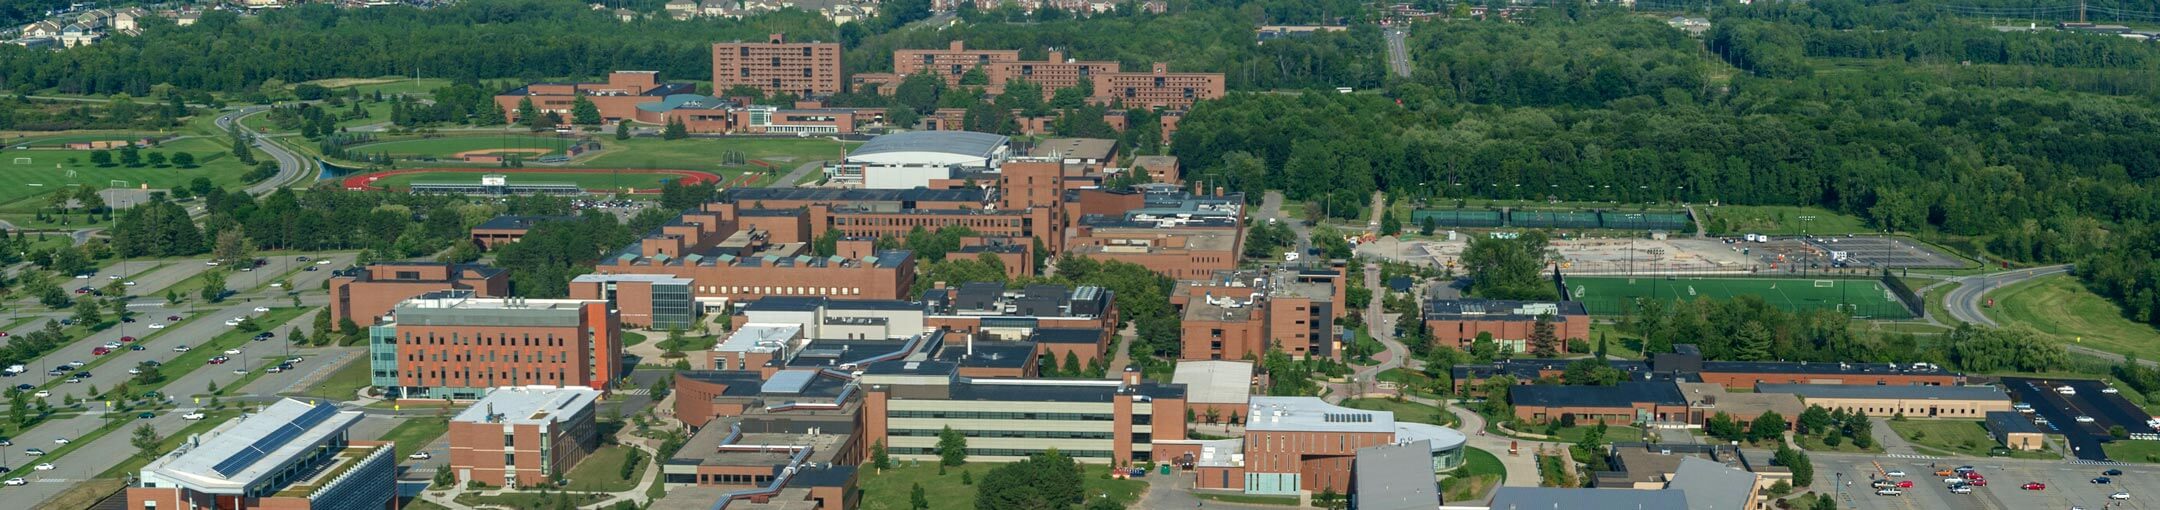 Aerial photo of the Rochester main campus